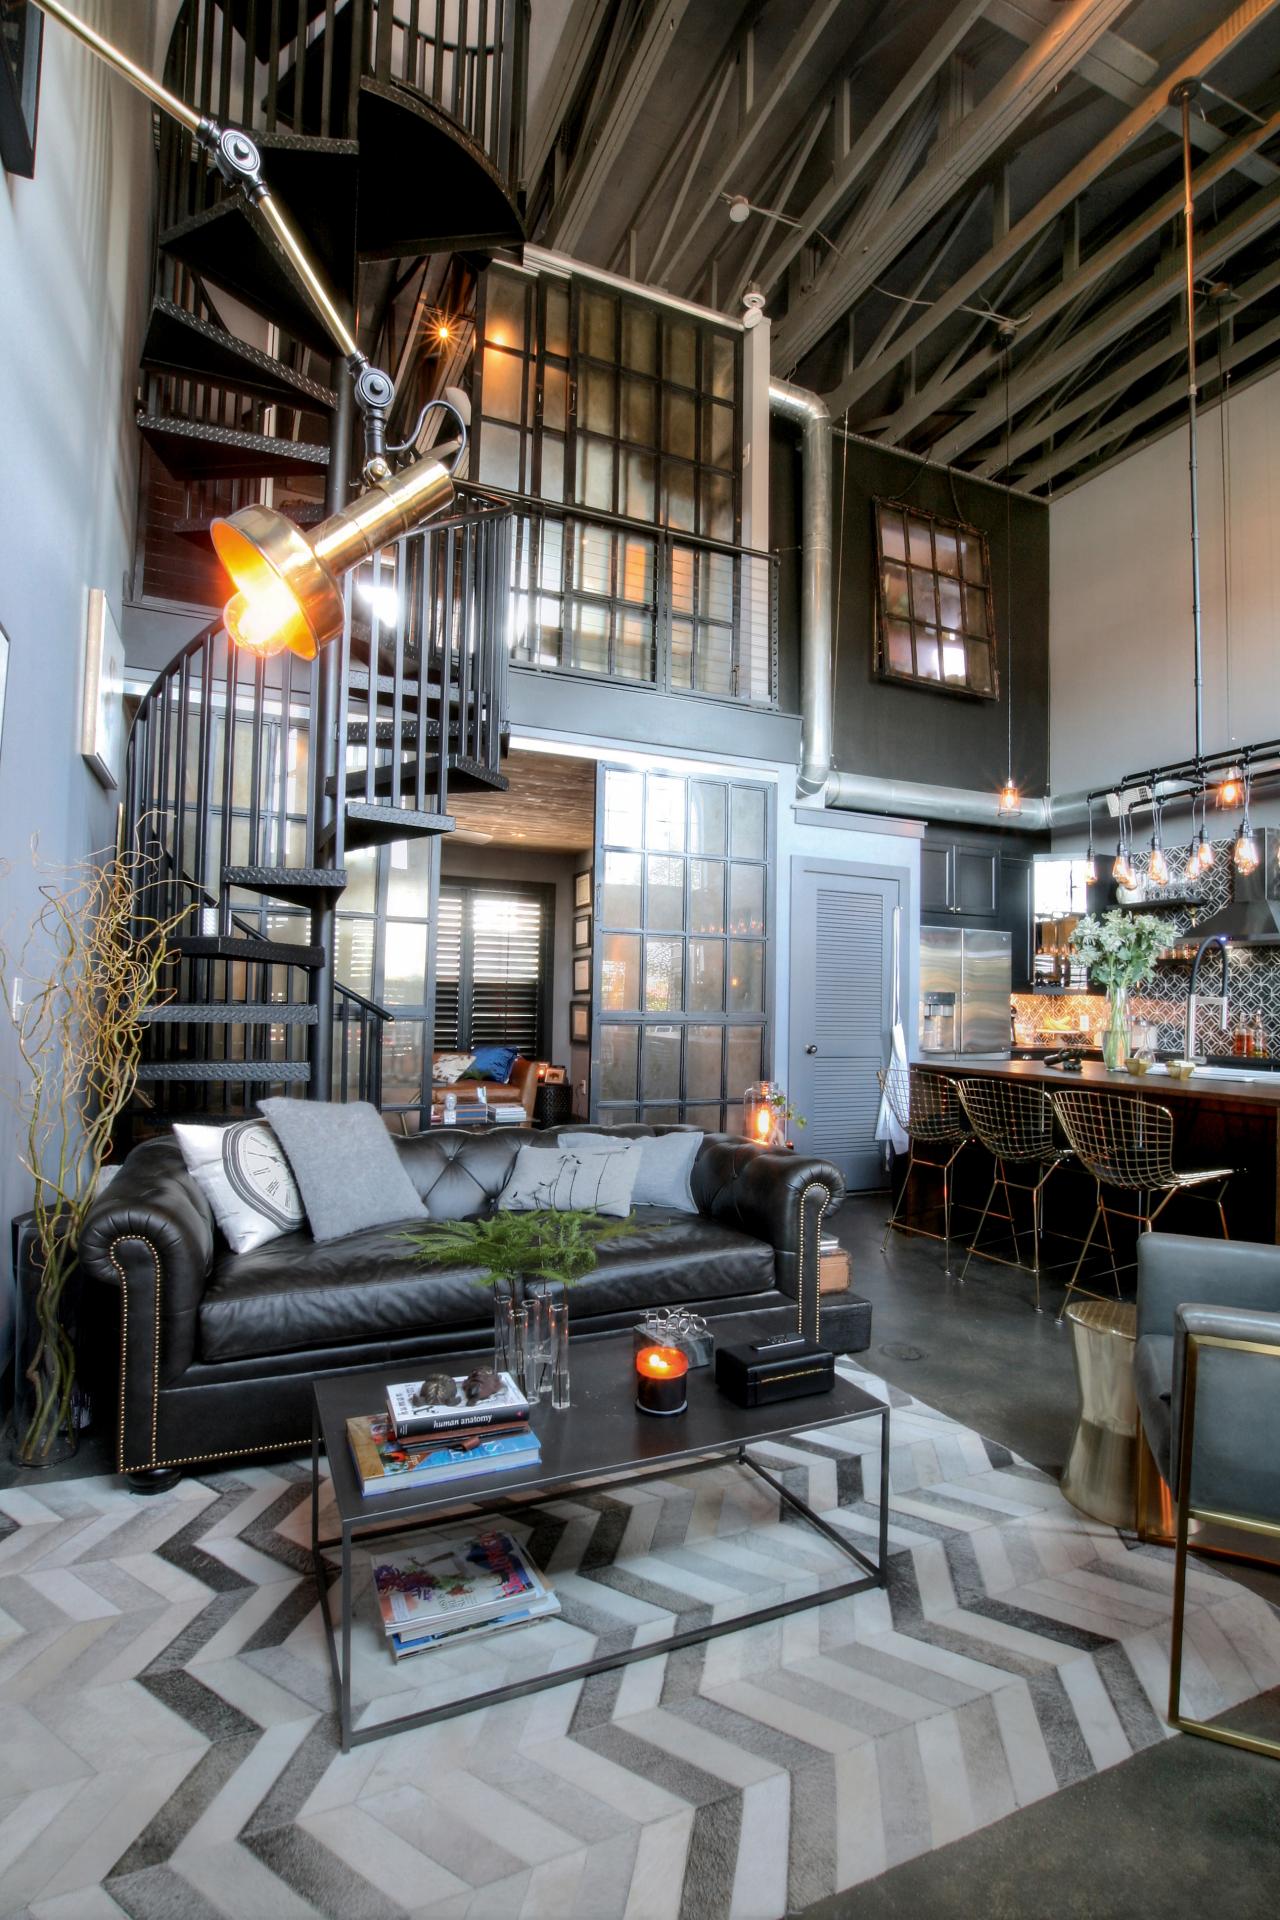 Industrial Style - Reflect Your Style and Inspire Your Home – The